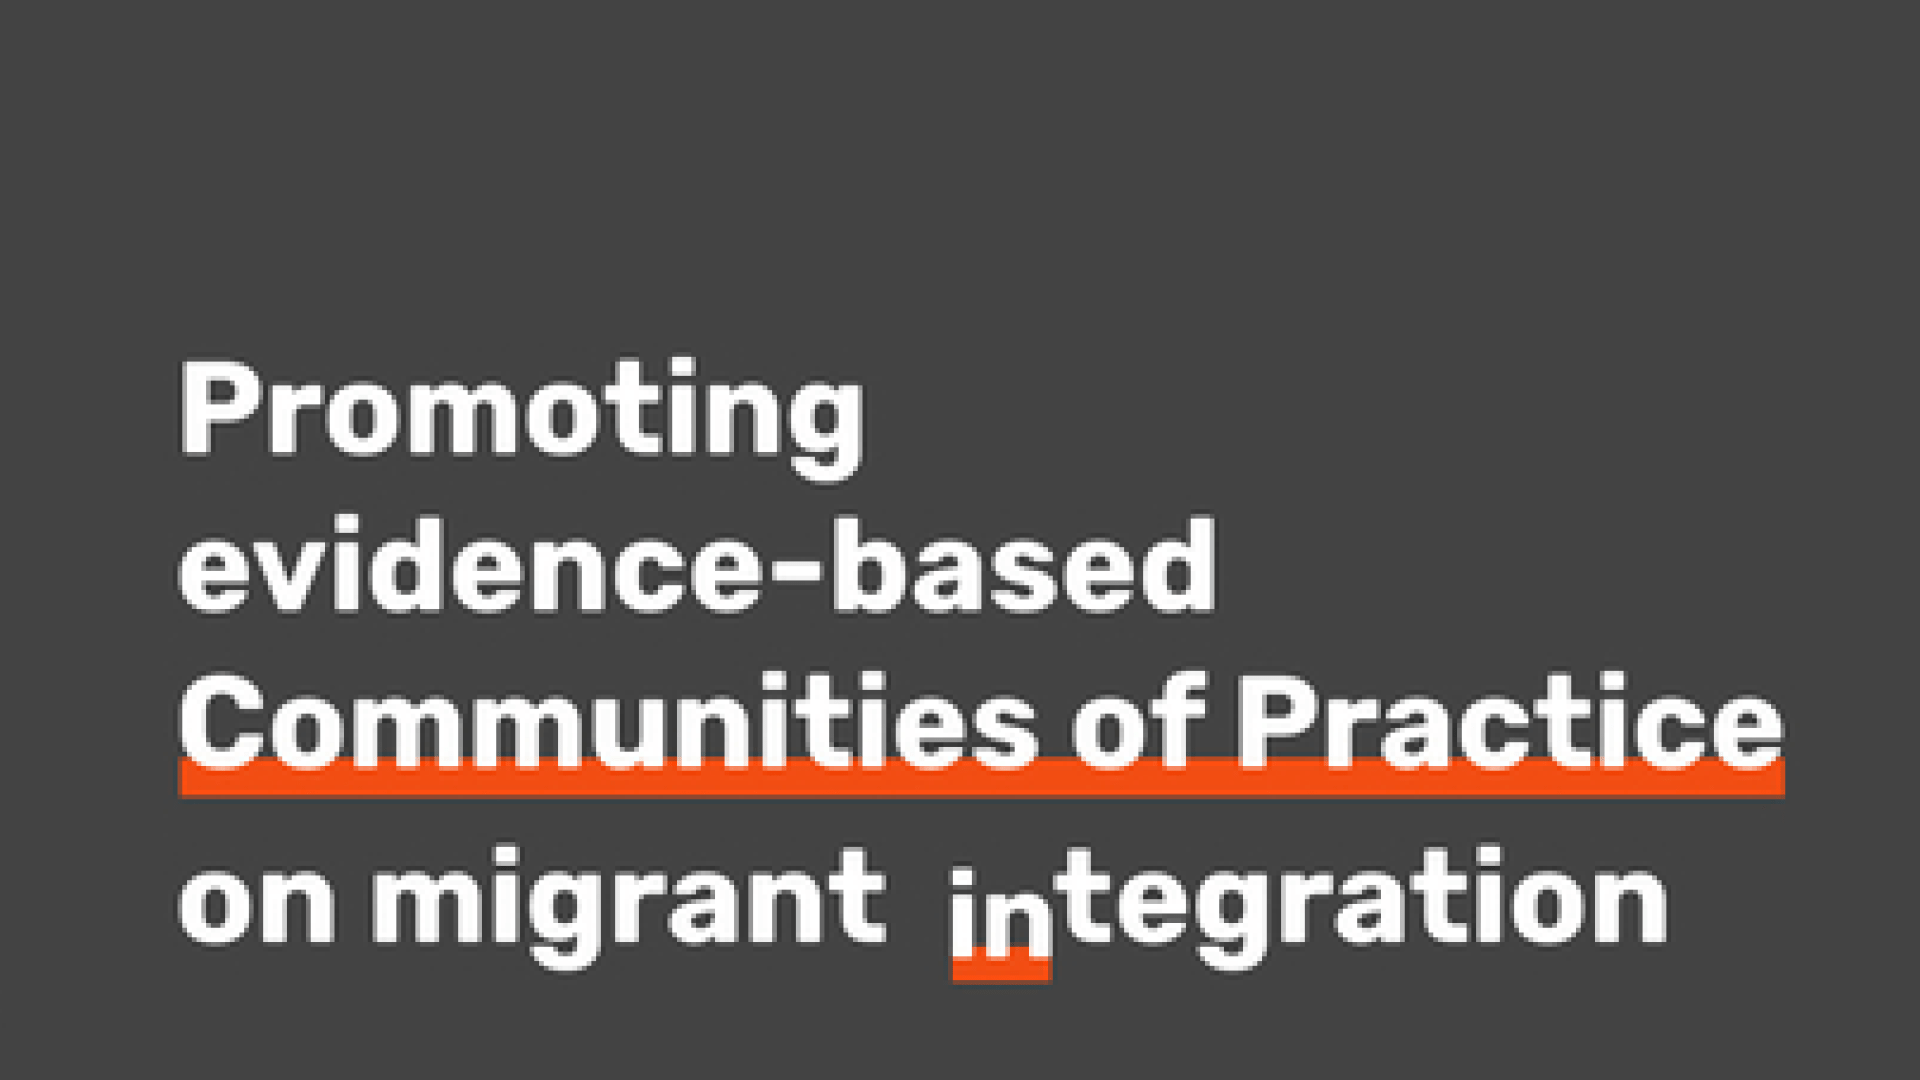 Promoting evidence-based Communities of Practice on migrant integration